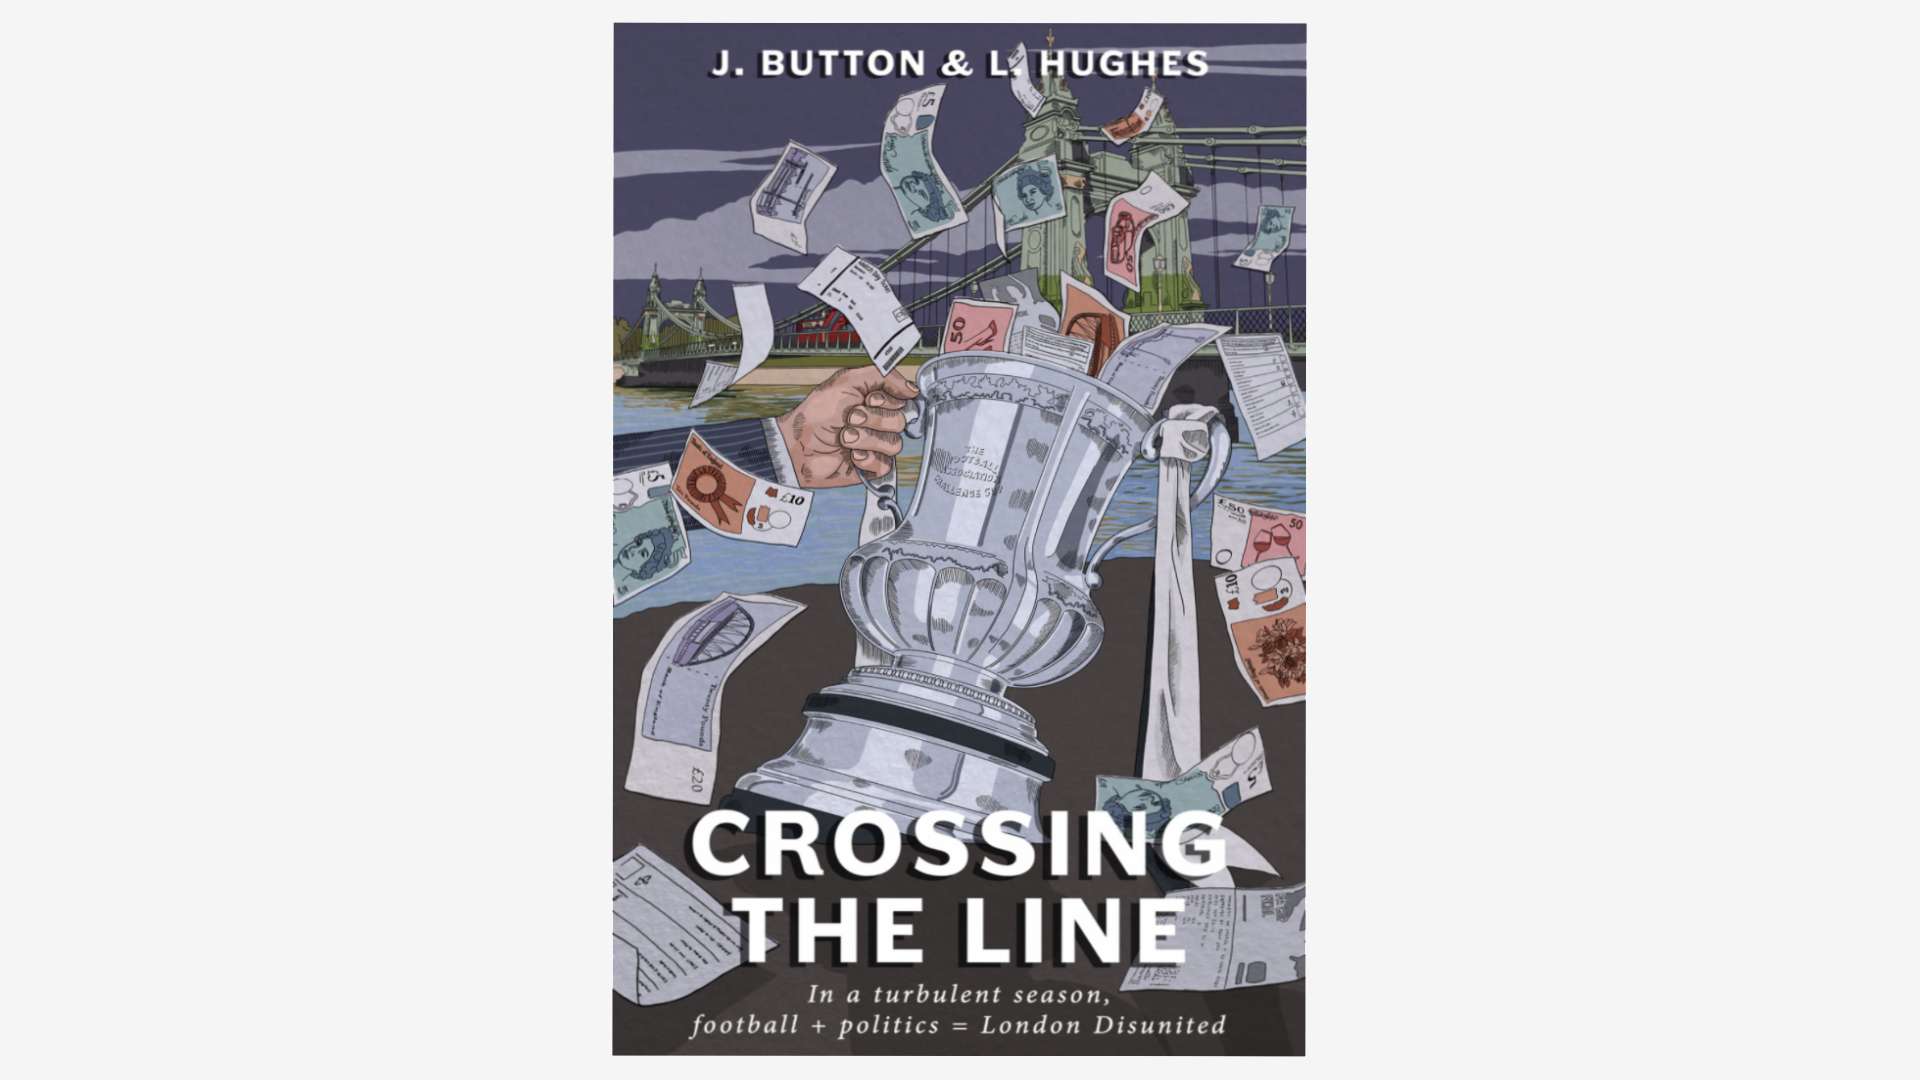 Crossing the line book